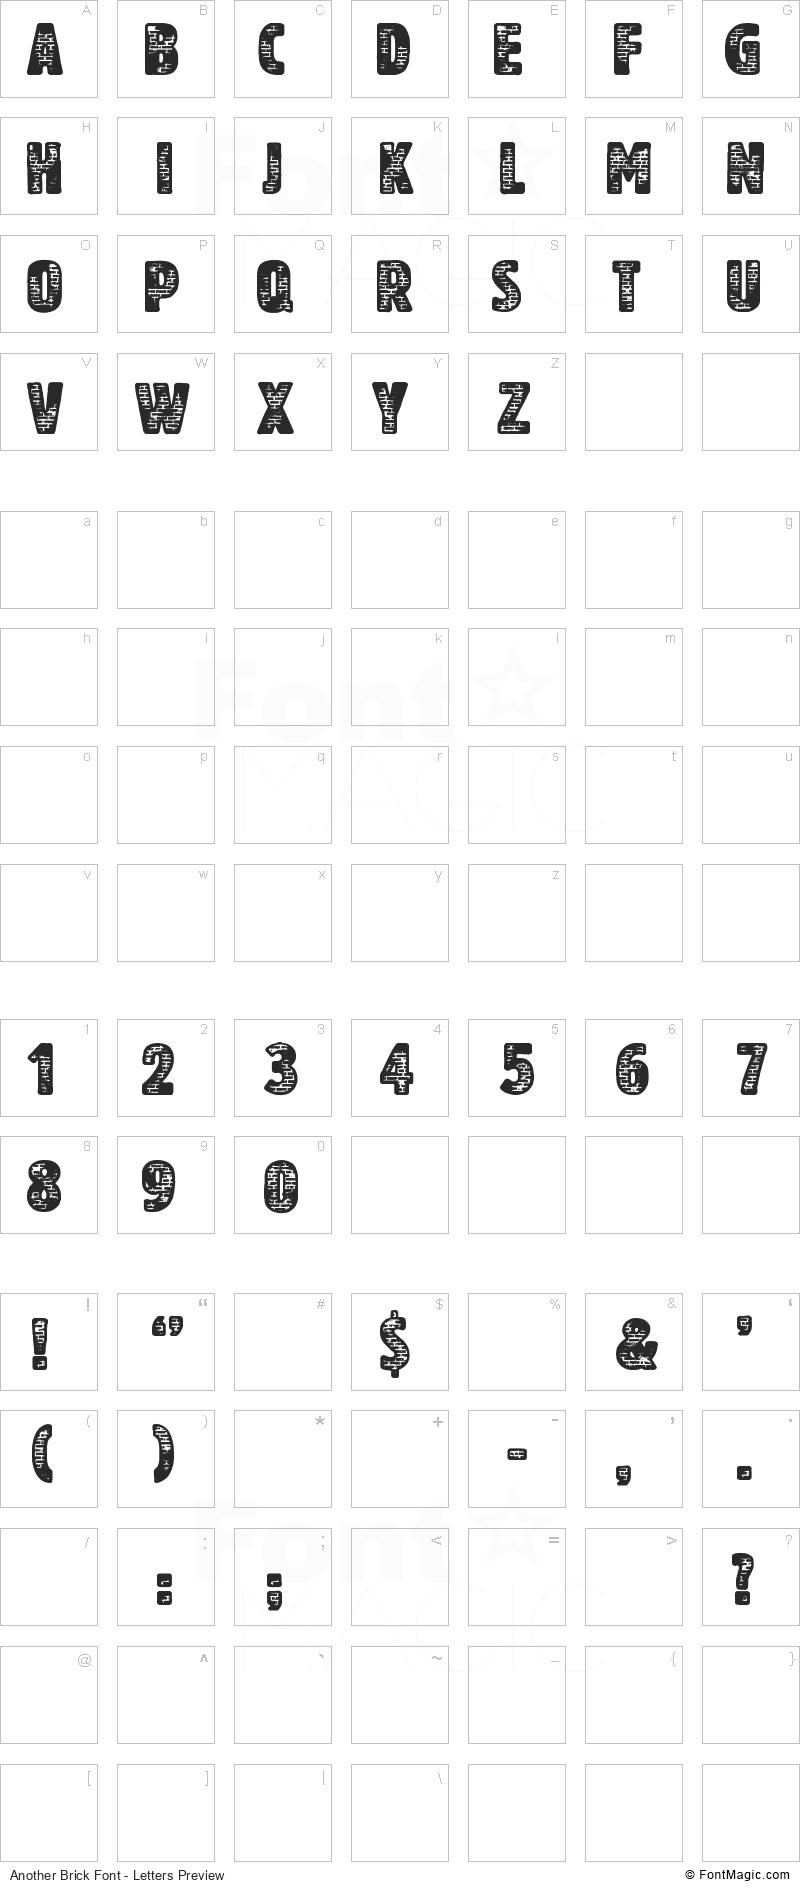 Another Brick Font - All Latters Preview Chart